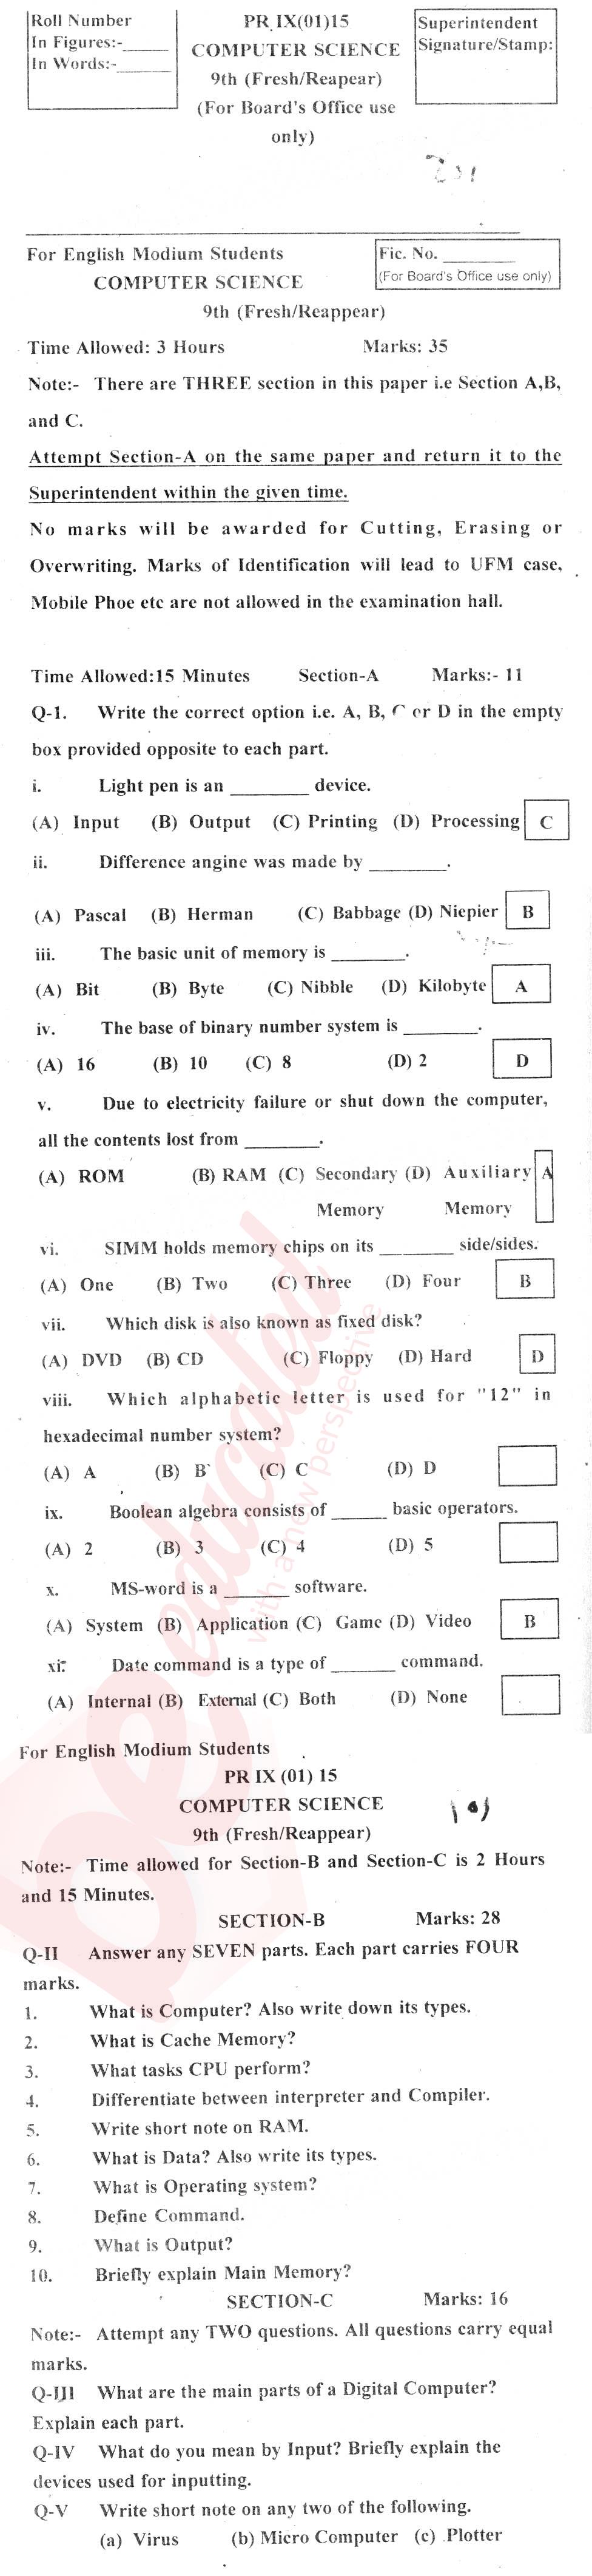 Computer Science 9th English Medium Past Paper Group 1 BISE Kohat 2015